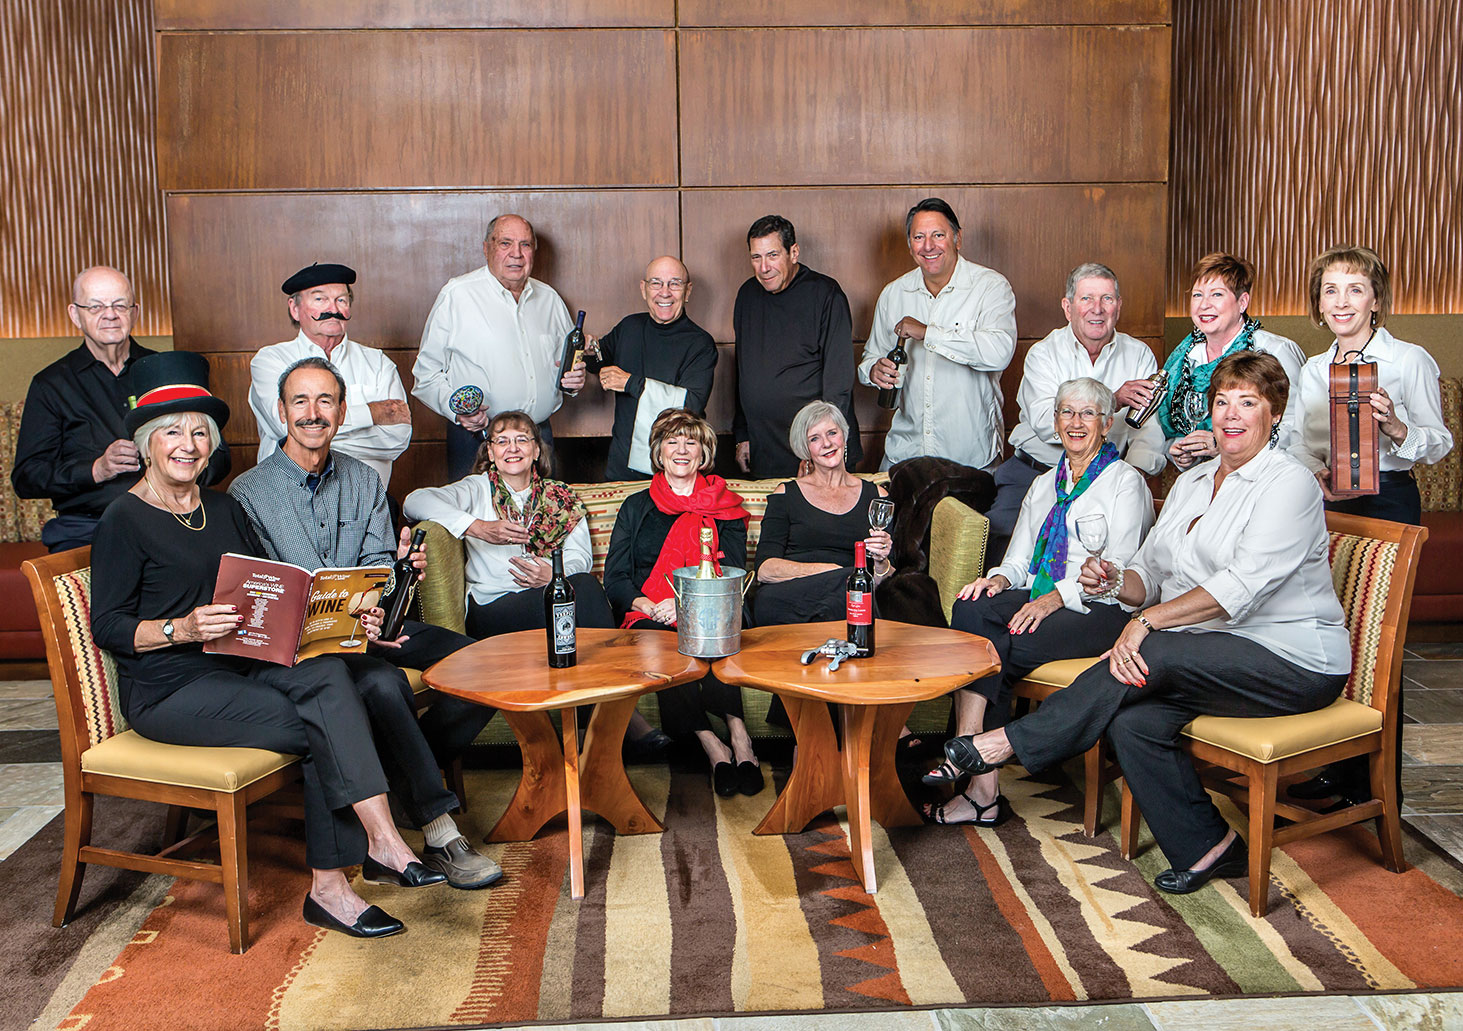 The cast of Eat, Drink and Be Deadly! has been hard at work since November rehearsing for shows this month. The dinner theater mystery will be presented at two SaddleBrooke venues and provide proceeds to both HOAs; photo by Steve Weiss.